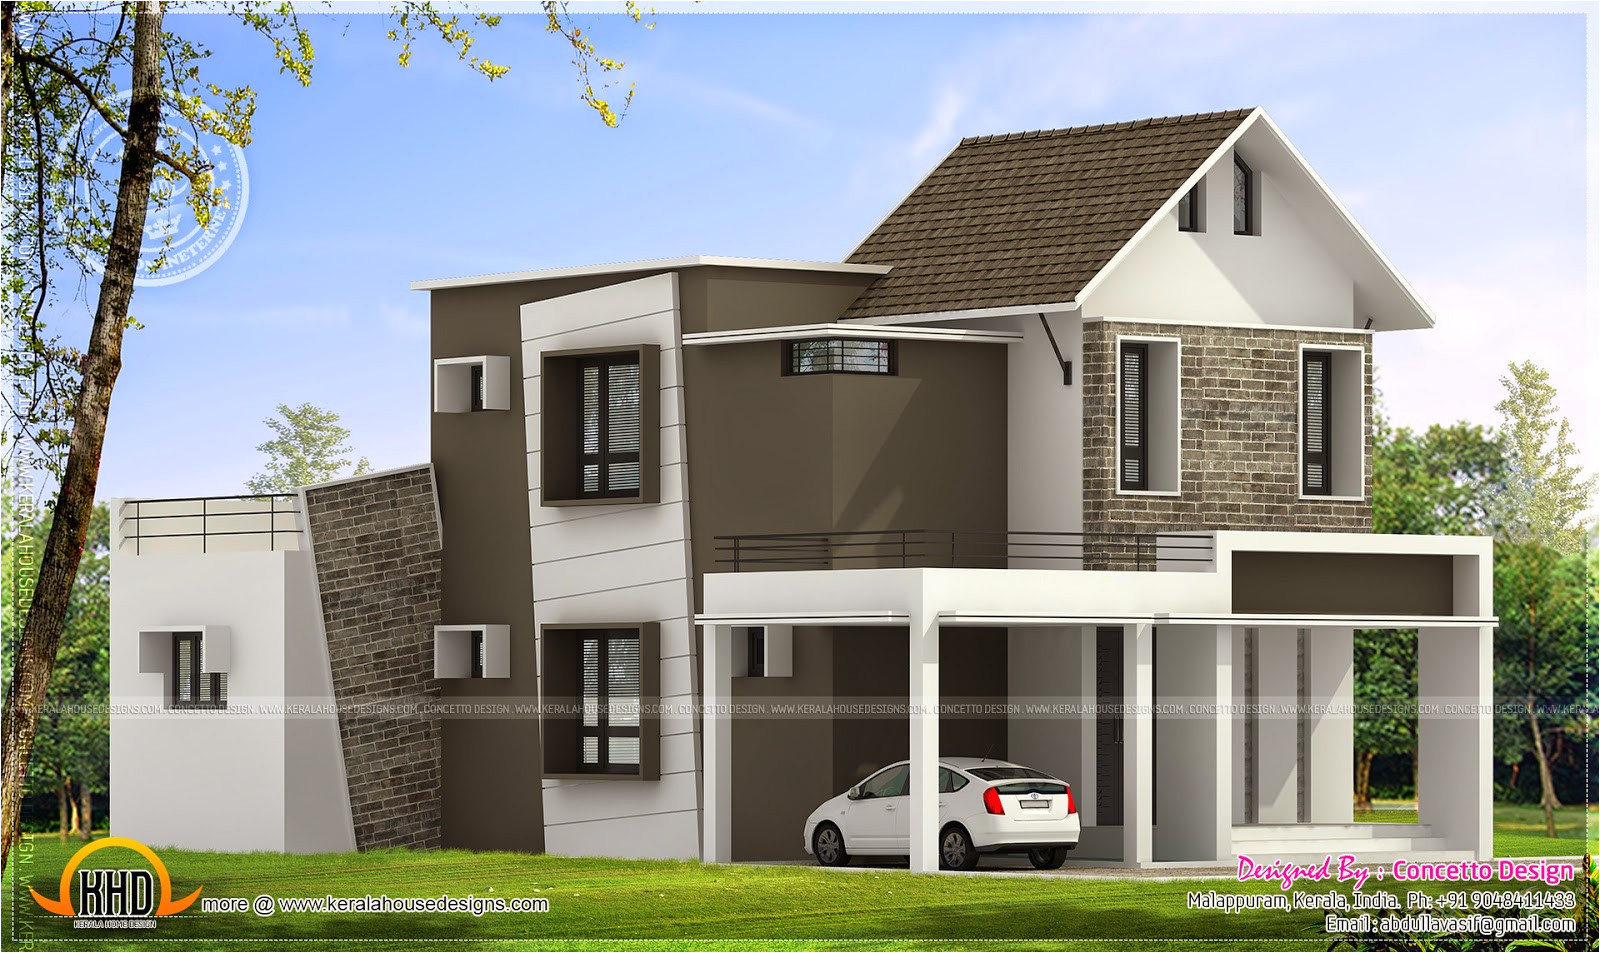 Home Plans and Design May 2014 Kerala Home Design and Floor Plans